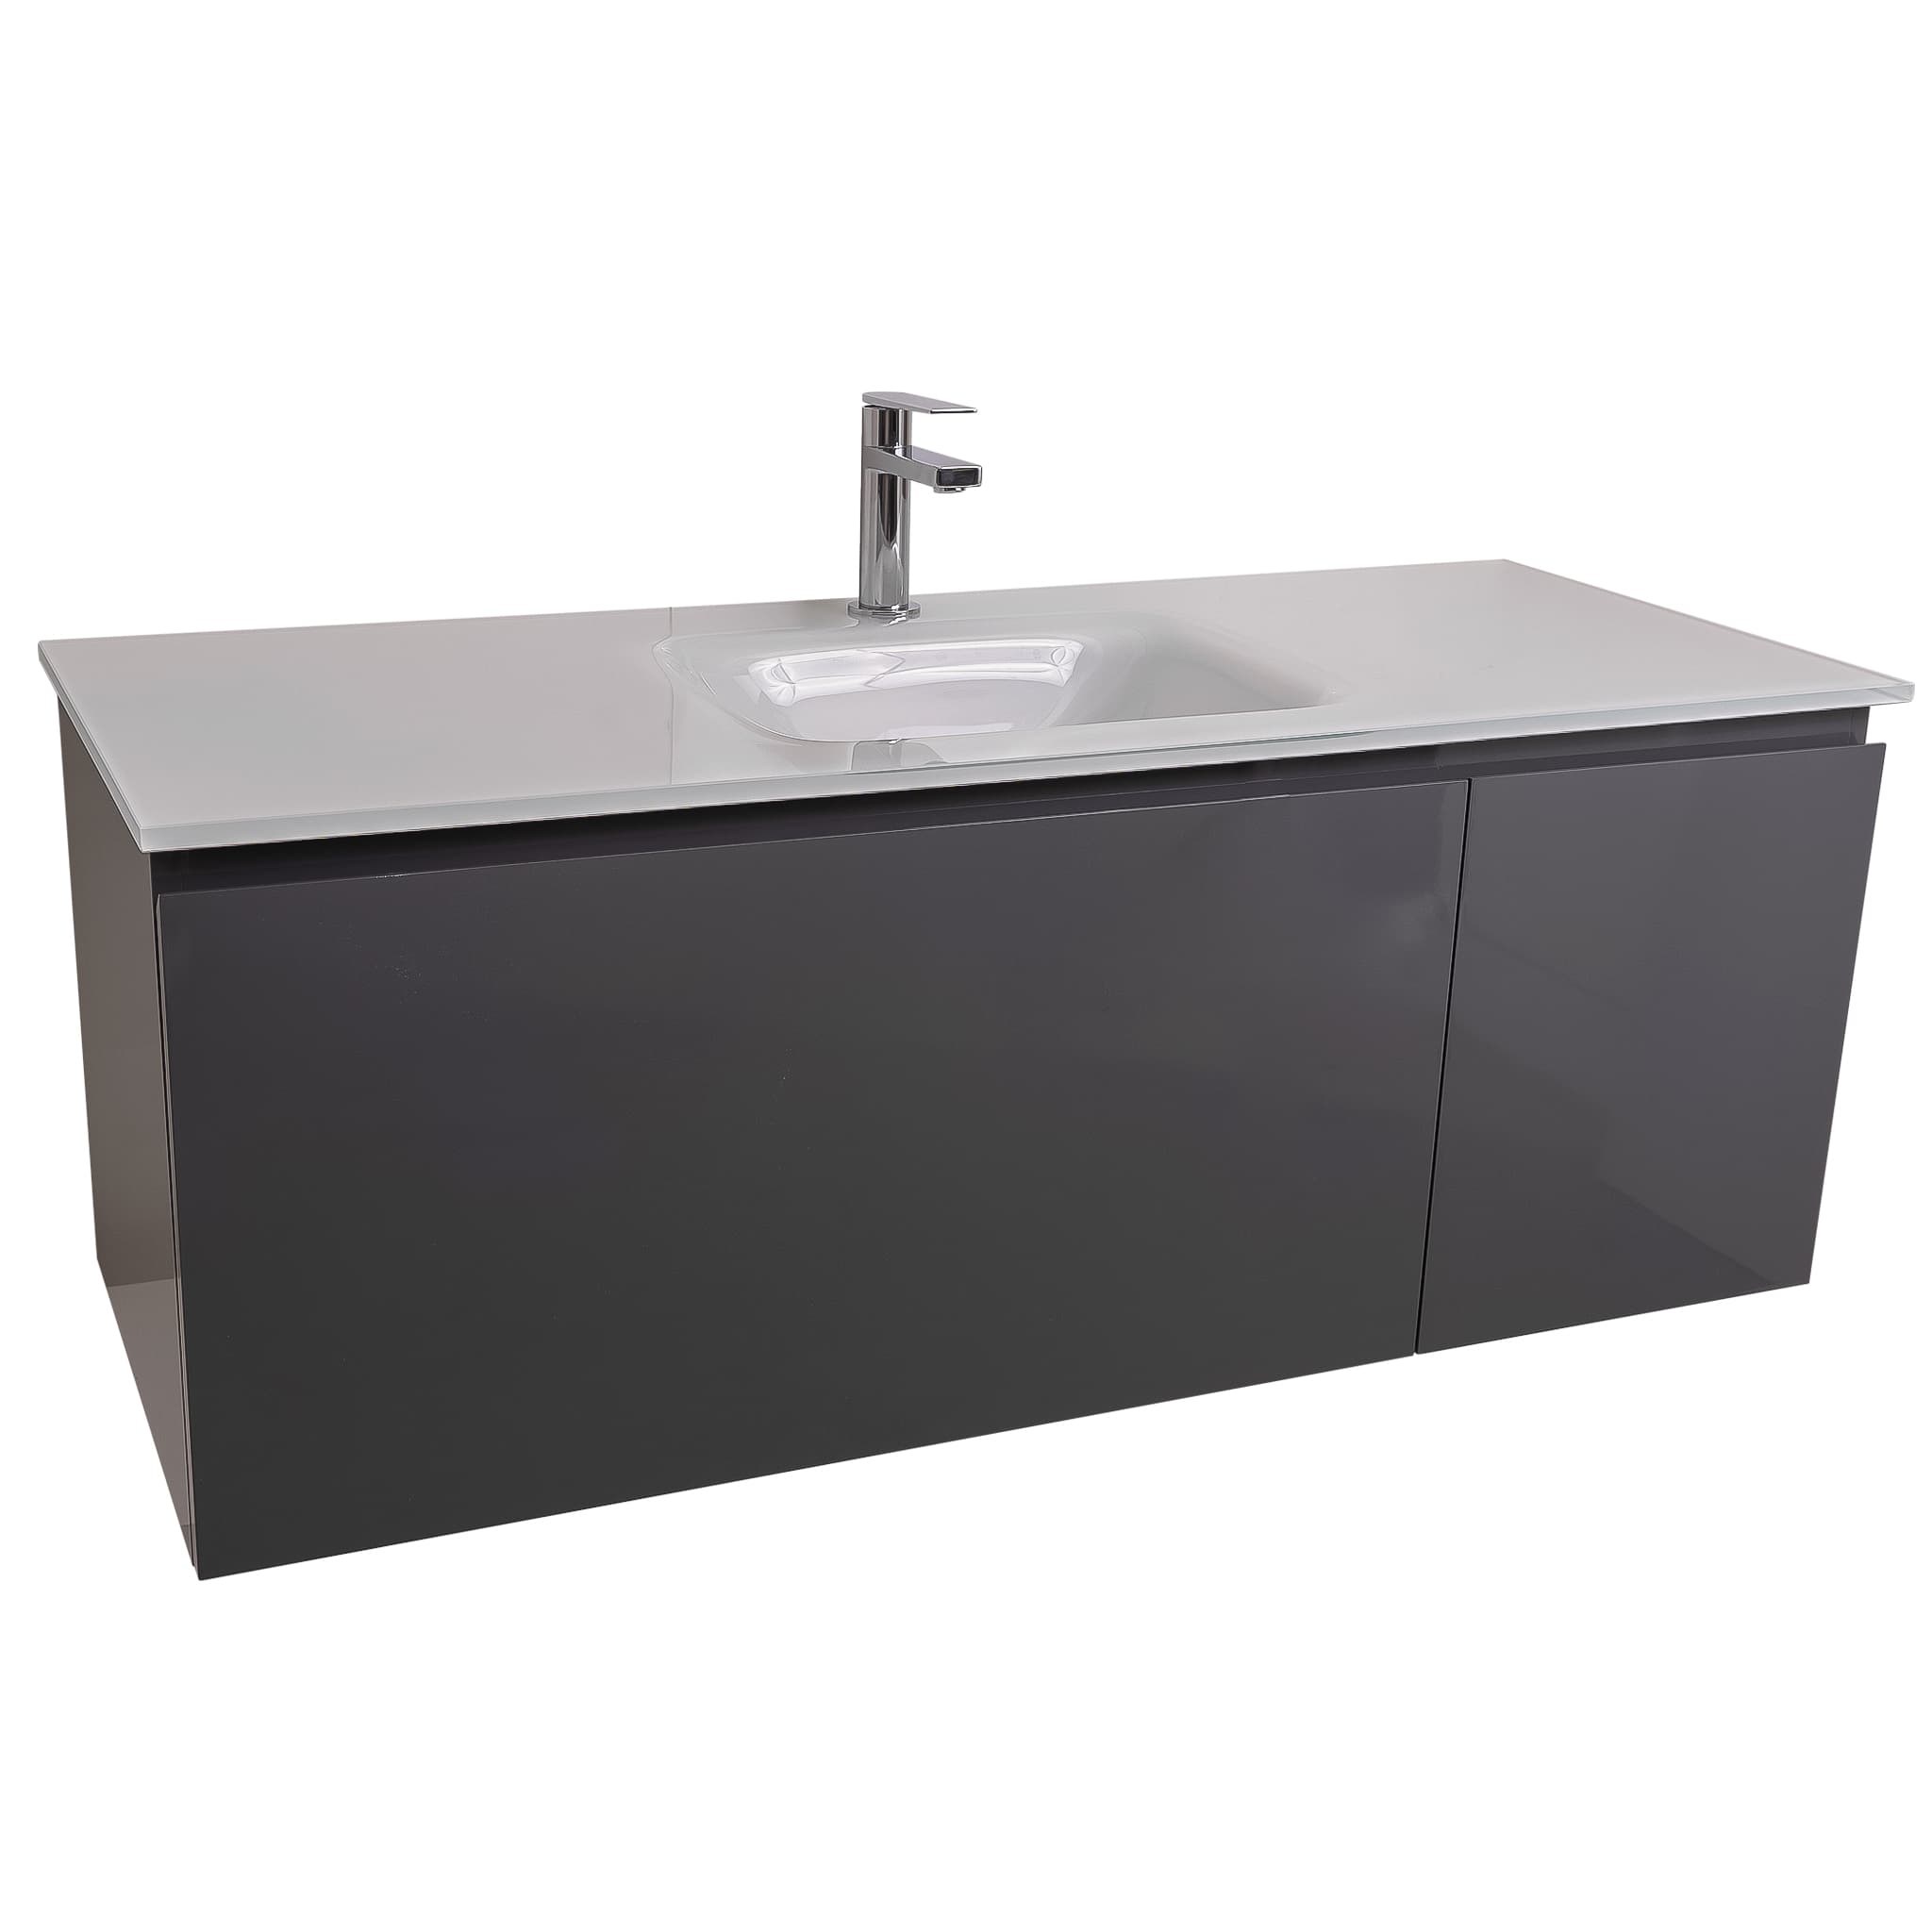 Venice 47.5 Anthracite High Gloss Cabinet, White Tempered Glass Sink, Wall Mounted Modern Vanity Set